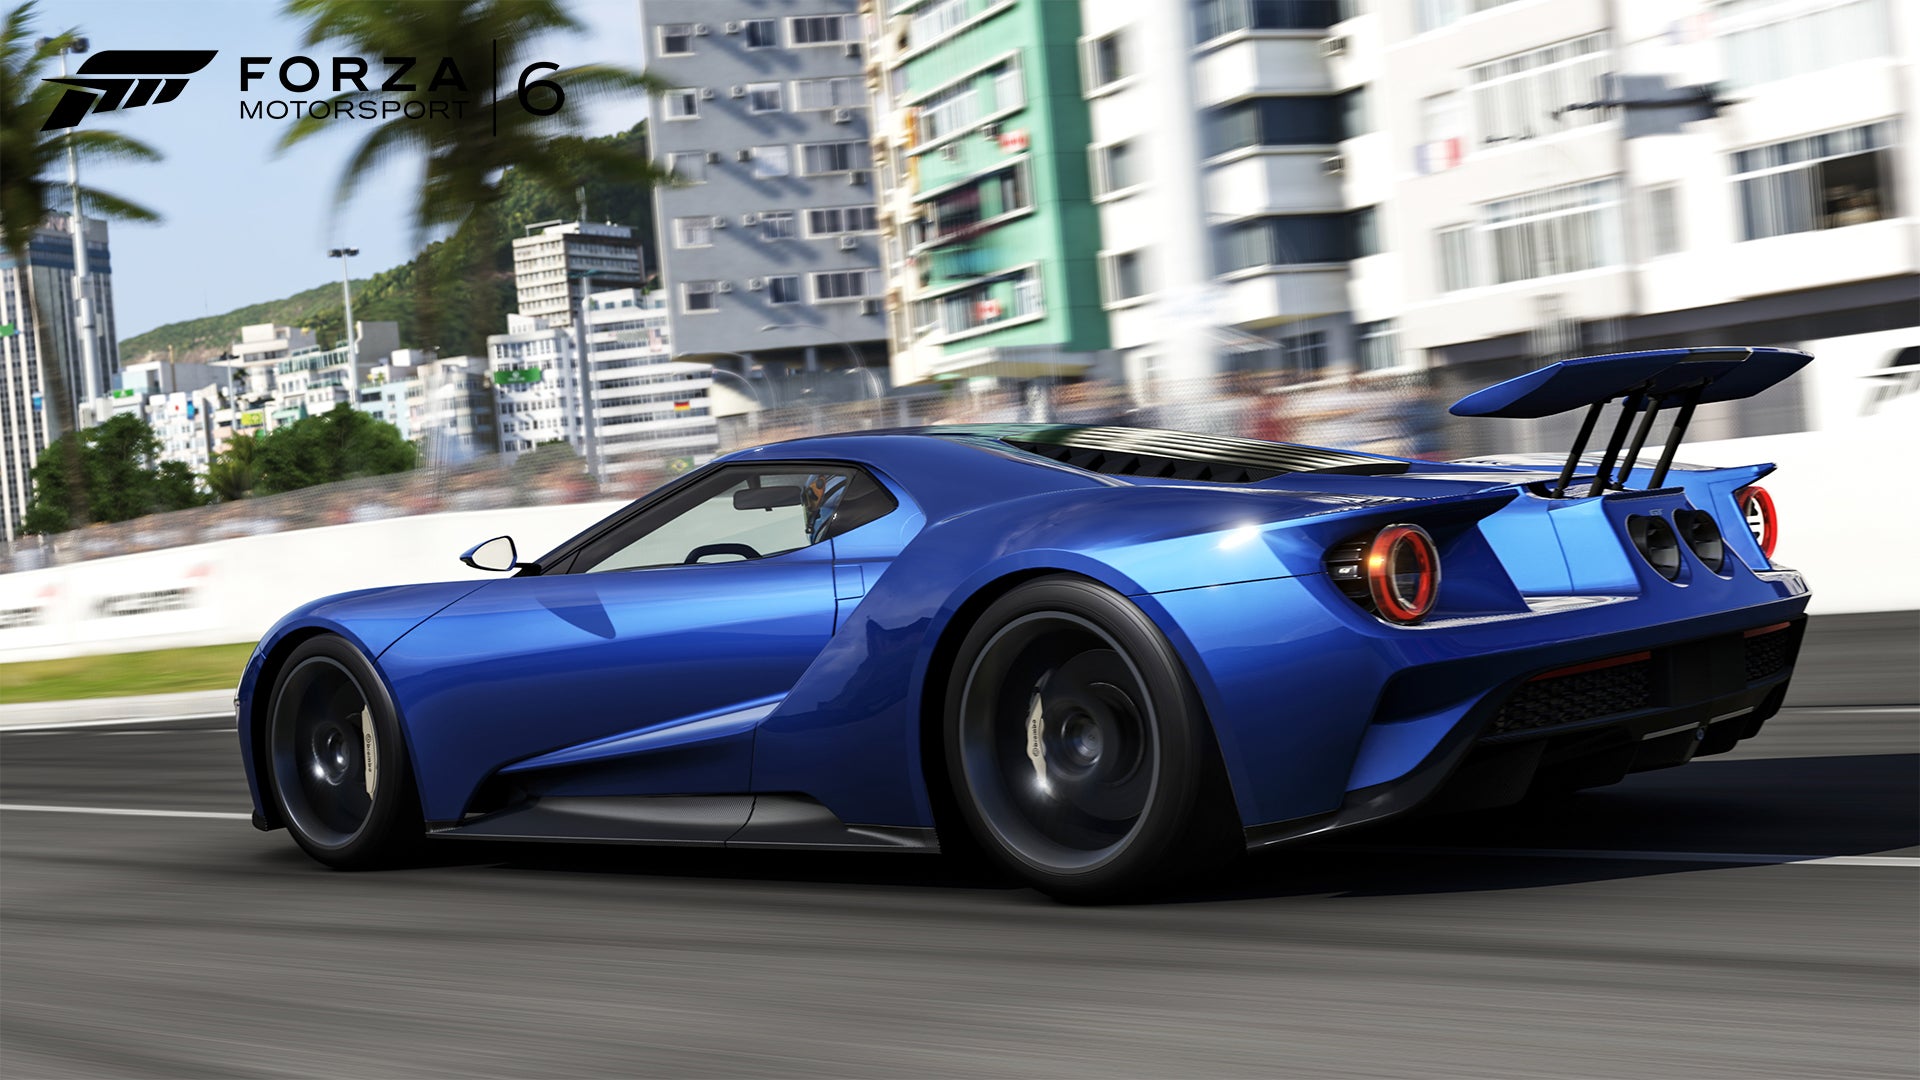 Image for Forza Motorsport 6 is getting Fast and Furious car pack DLC